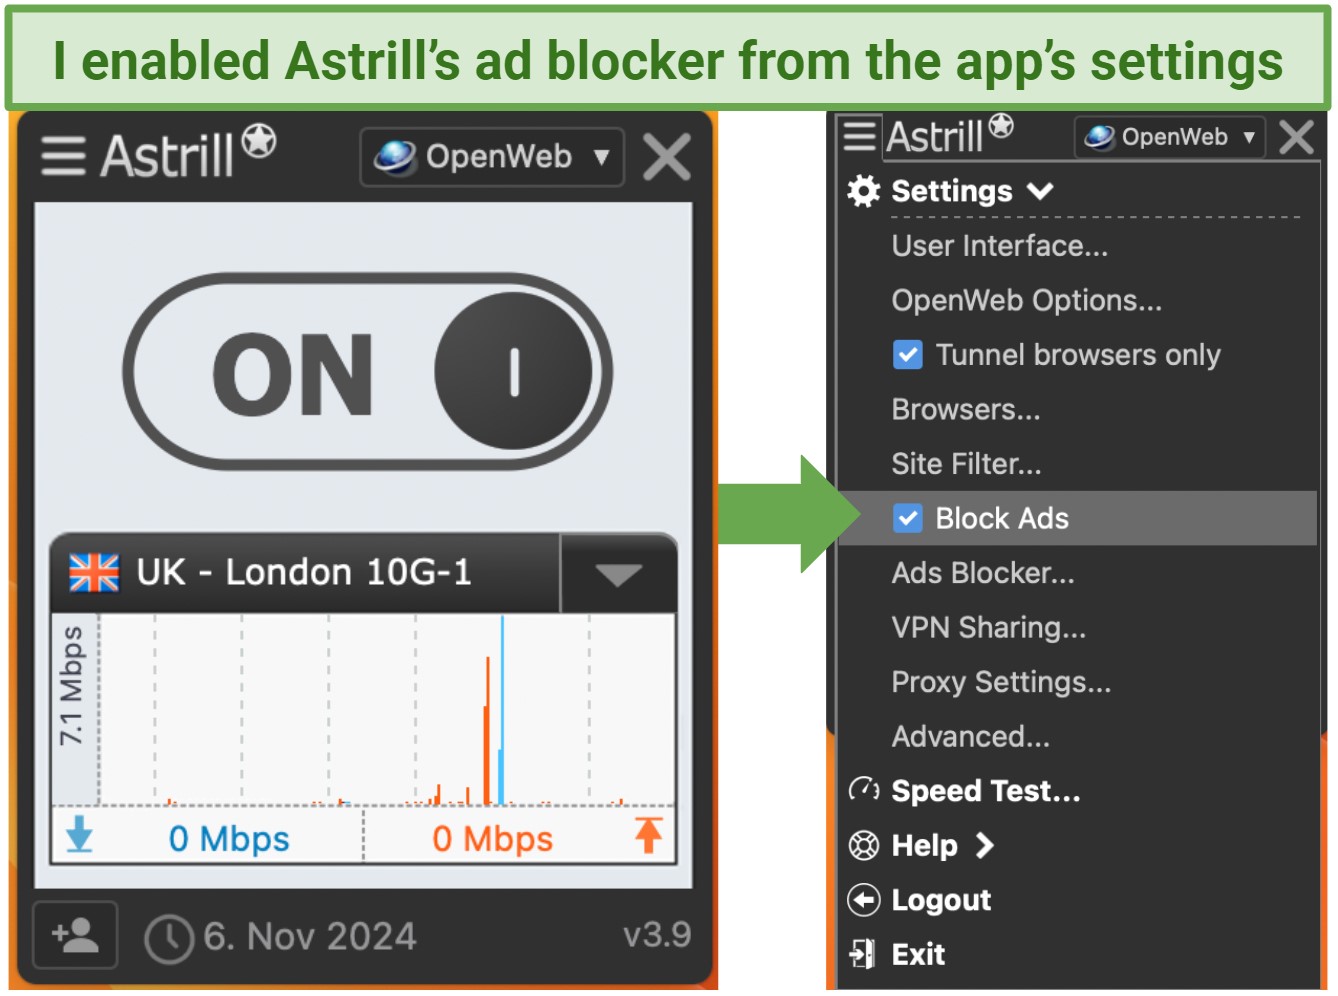 Screenshot of Astrill VPN's block ads feature in the settings